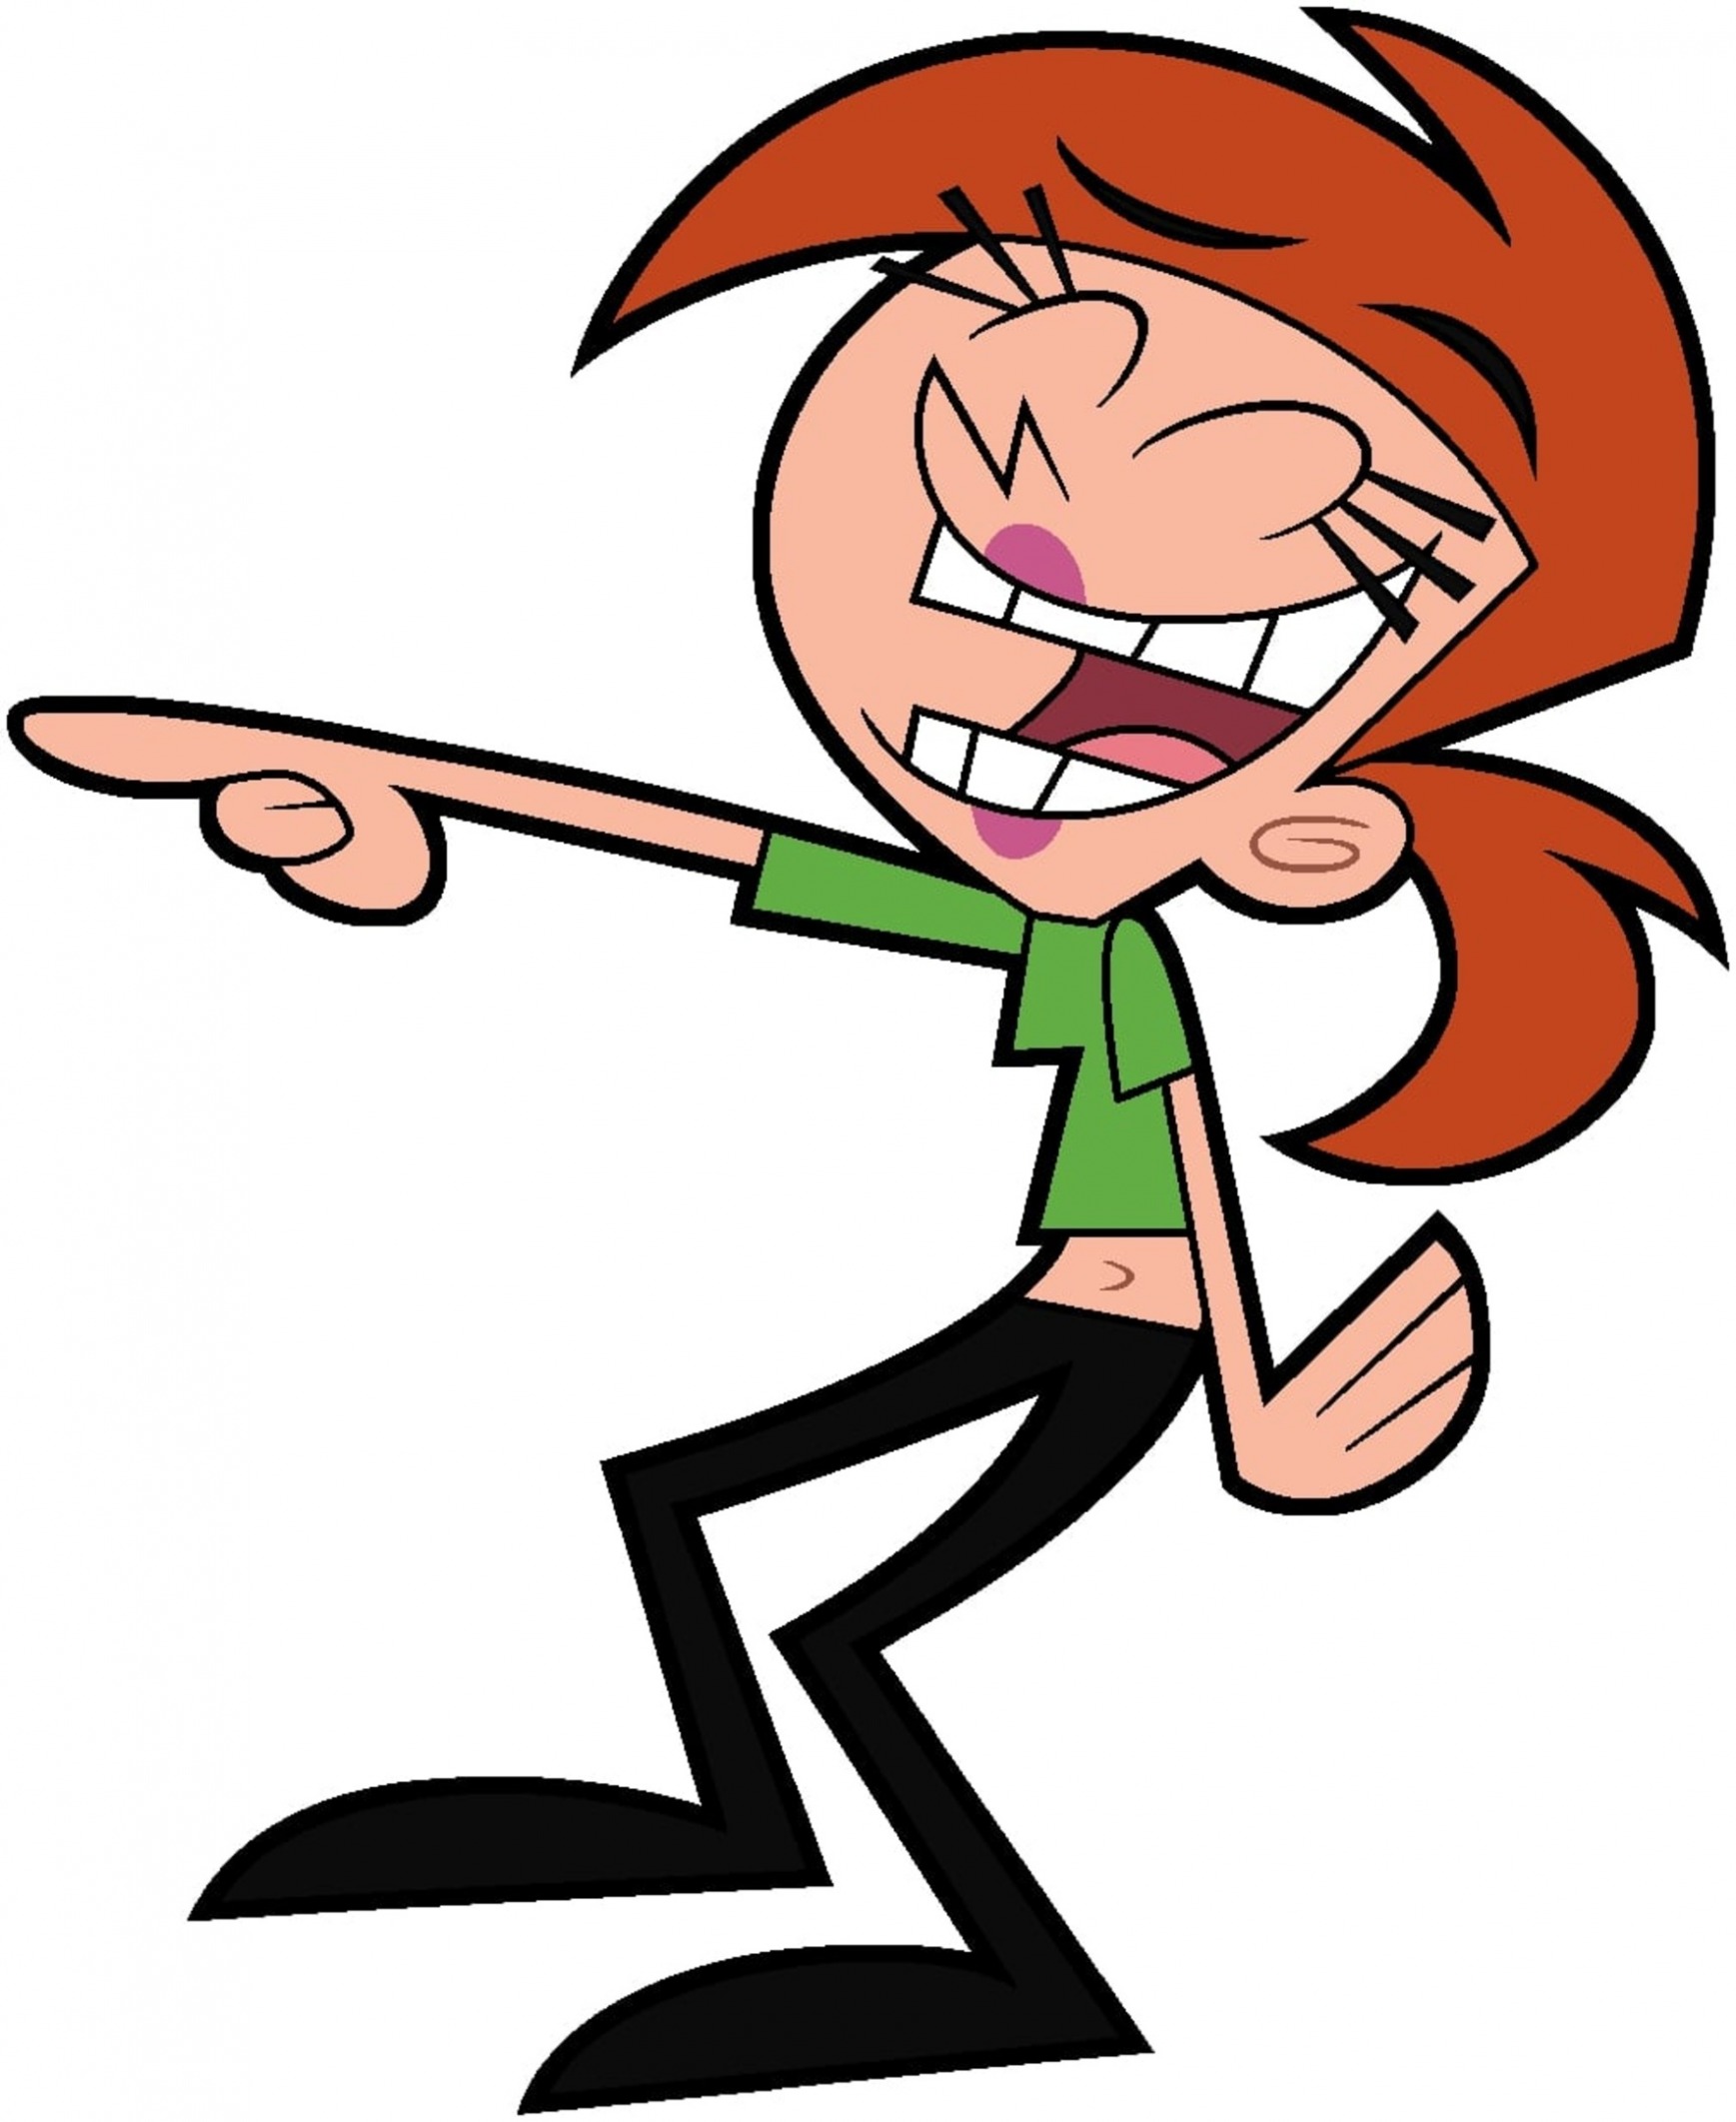 Vicky from The Fairly OddParents 10 Blank Meme Template